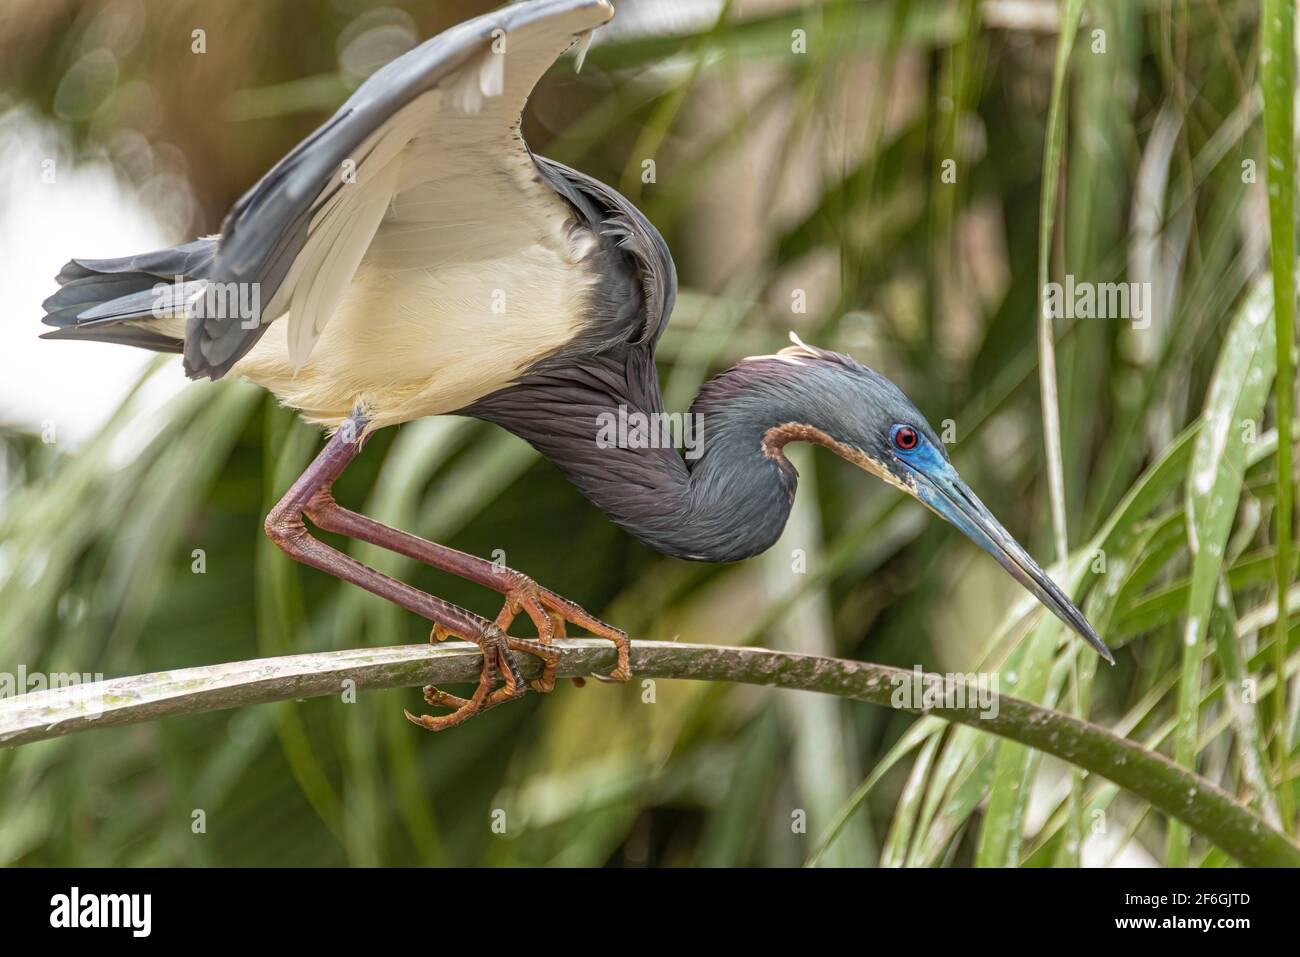 Tricolored heron (Egretta tricolor) perched on a cabbage palm frond in St. Augustine, Florida. (USA) Stock Photo